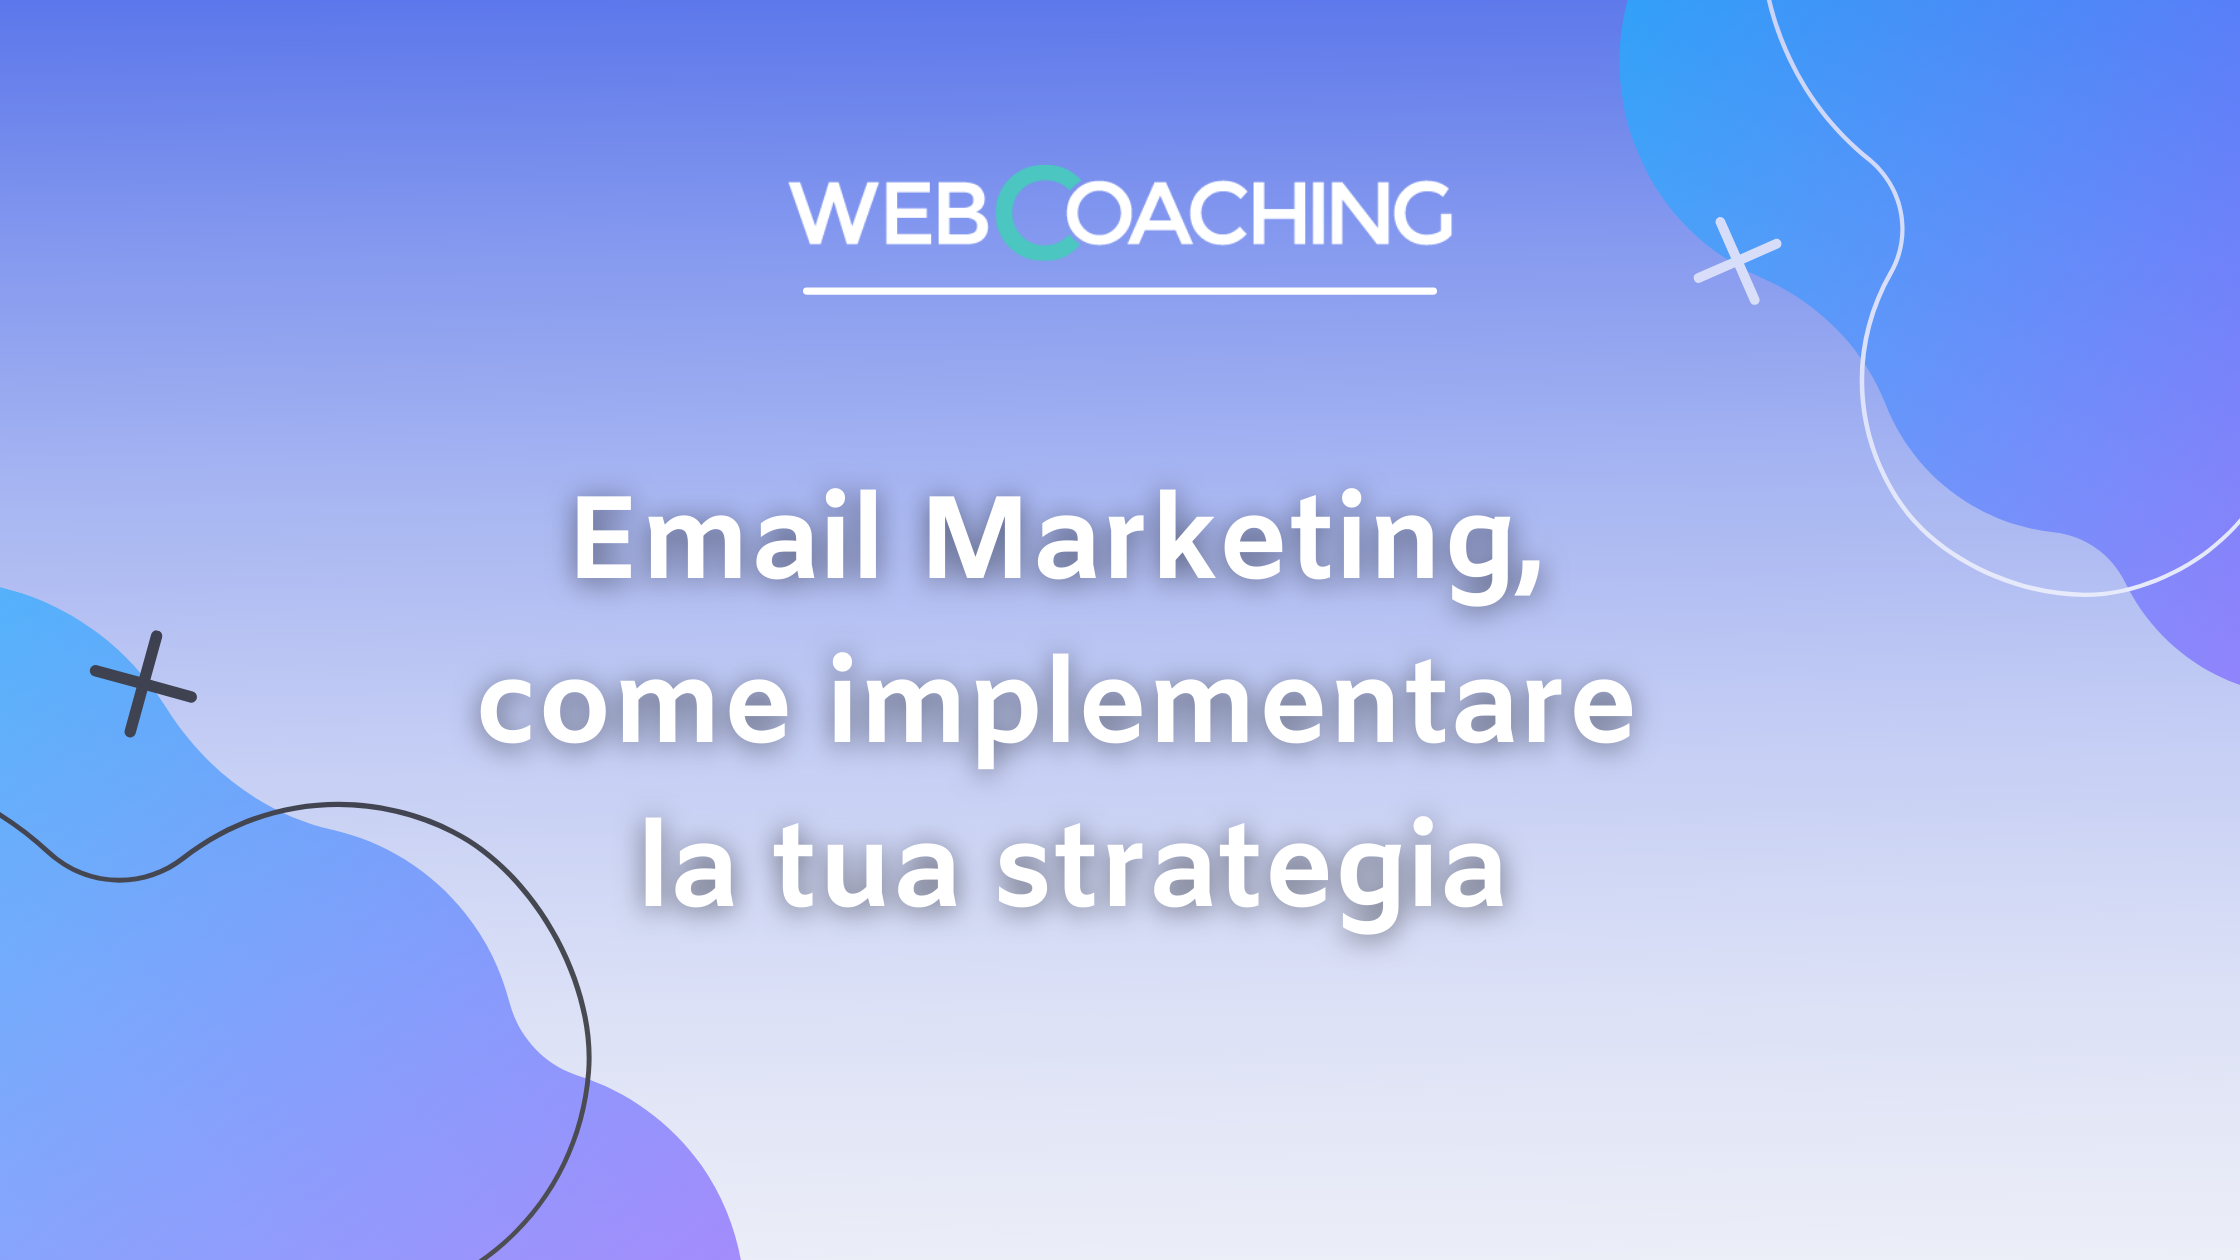 Email marketing implementare strategia